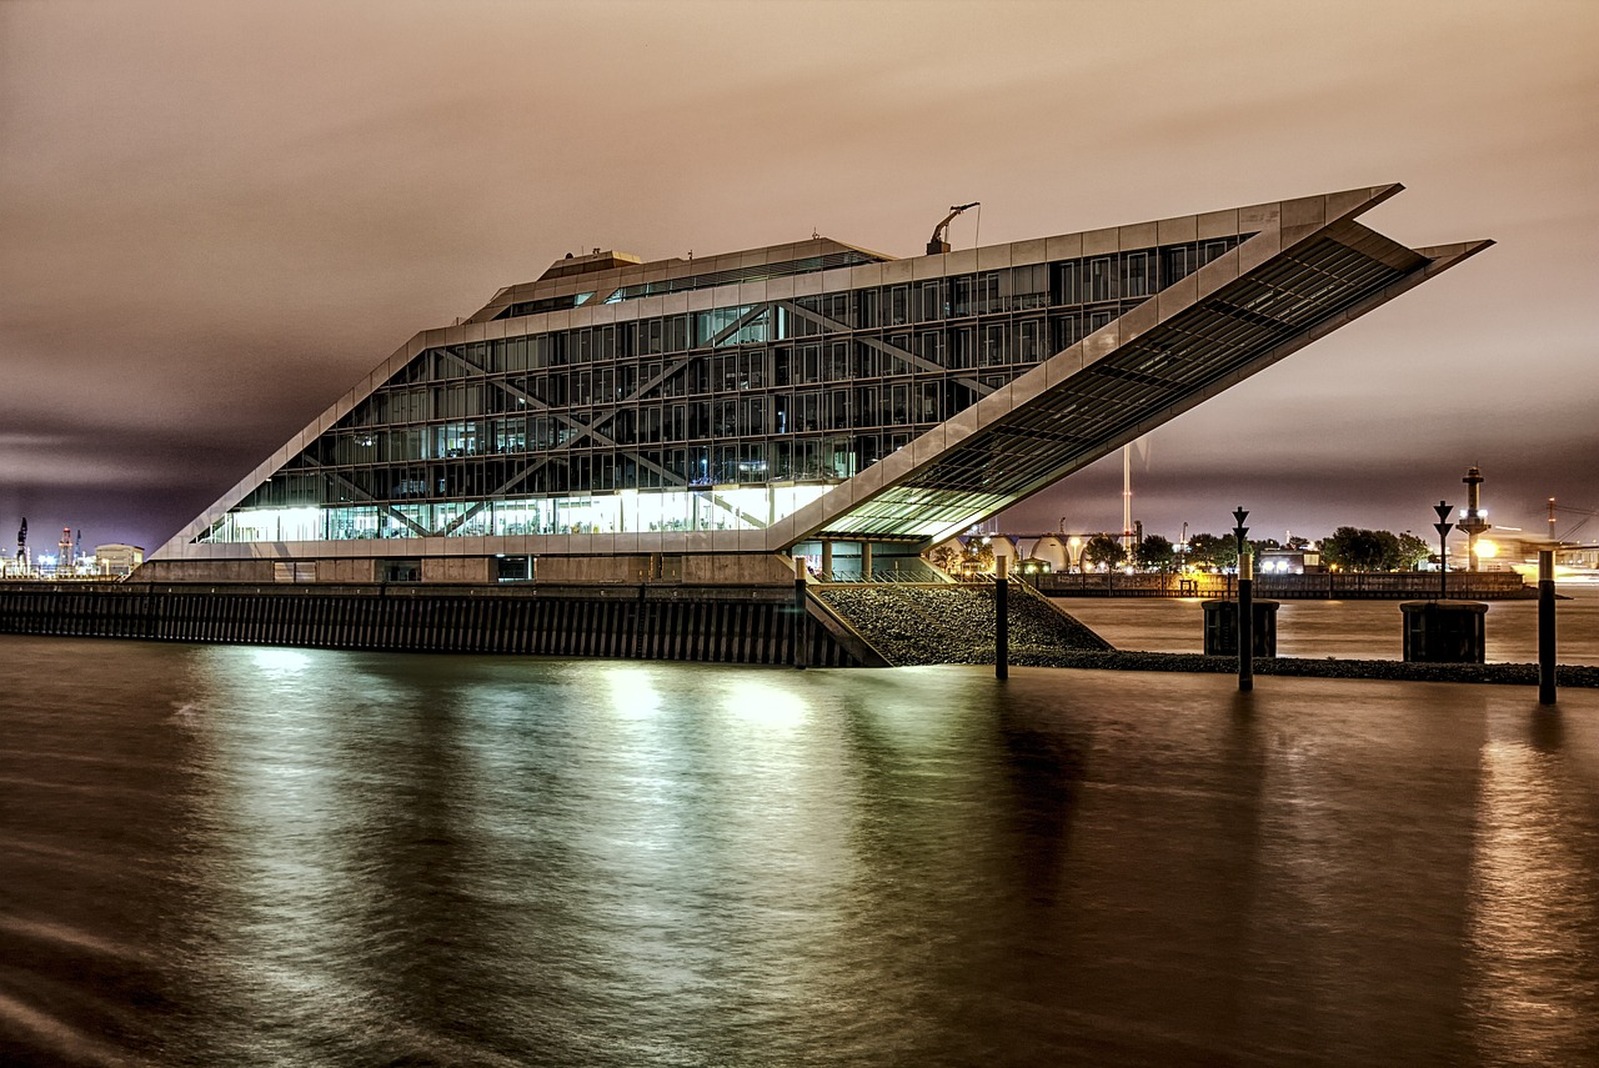 Image of Dockland Building by Team PhotoHound